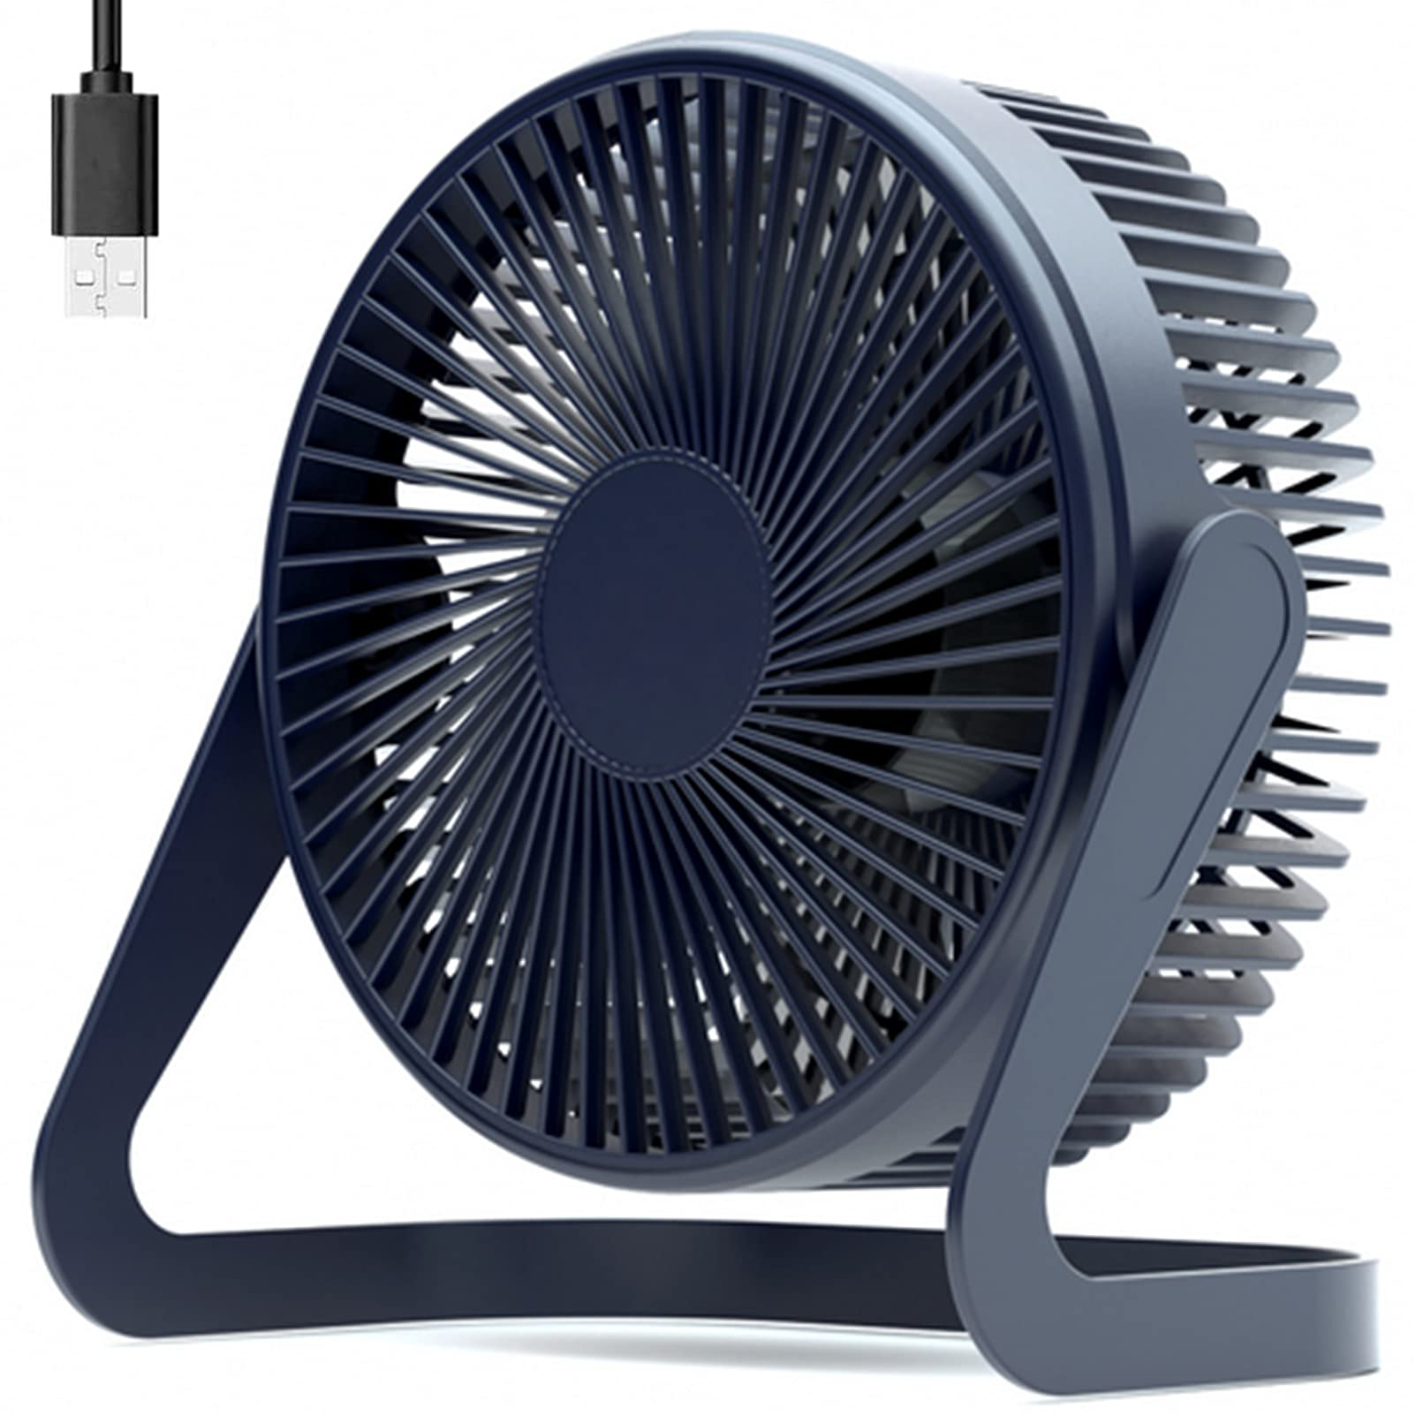 USB Fan 5 Inch Mini USB Desk Table Fan Personal Portable Desktop Cooling Fan Powered by USB PC Netbook for Camping Home Office Outdoor Travel, Strong Wind